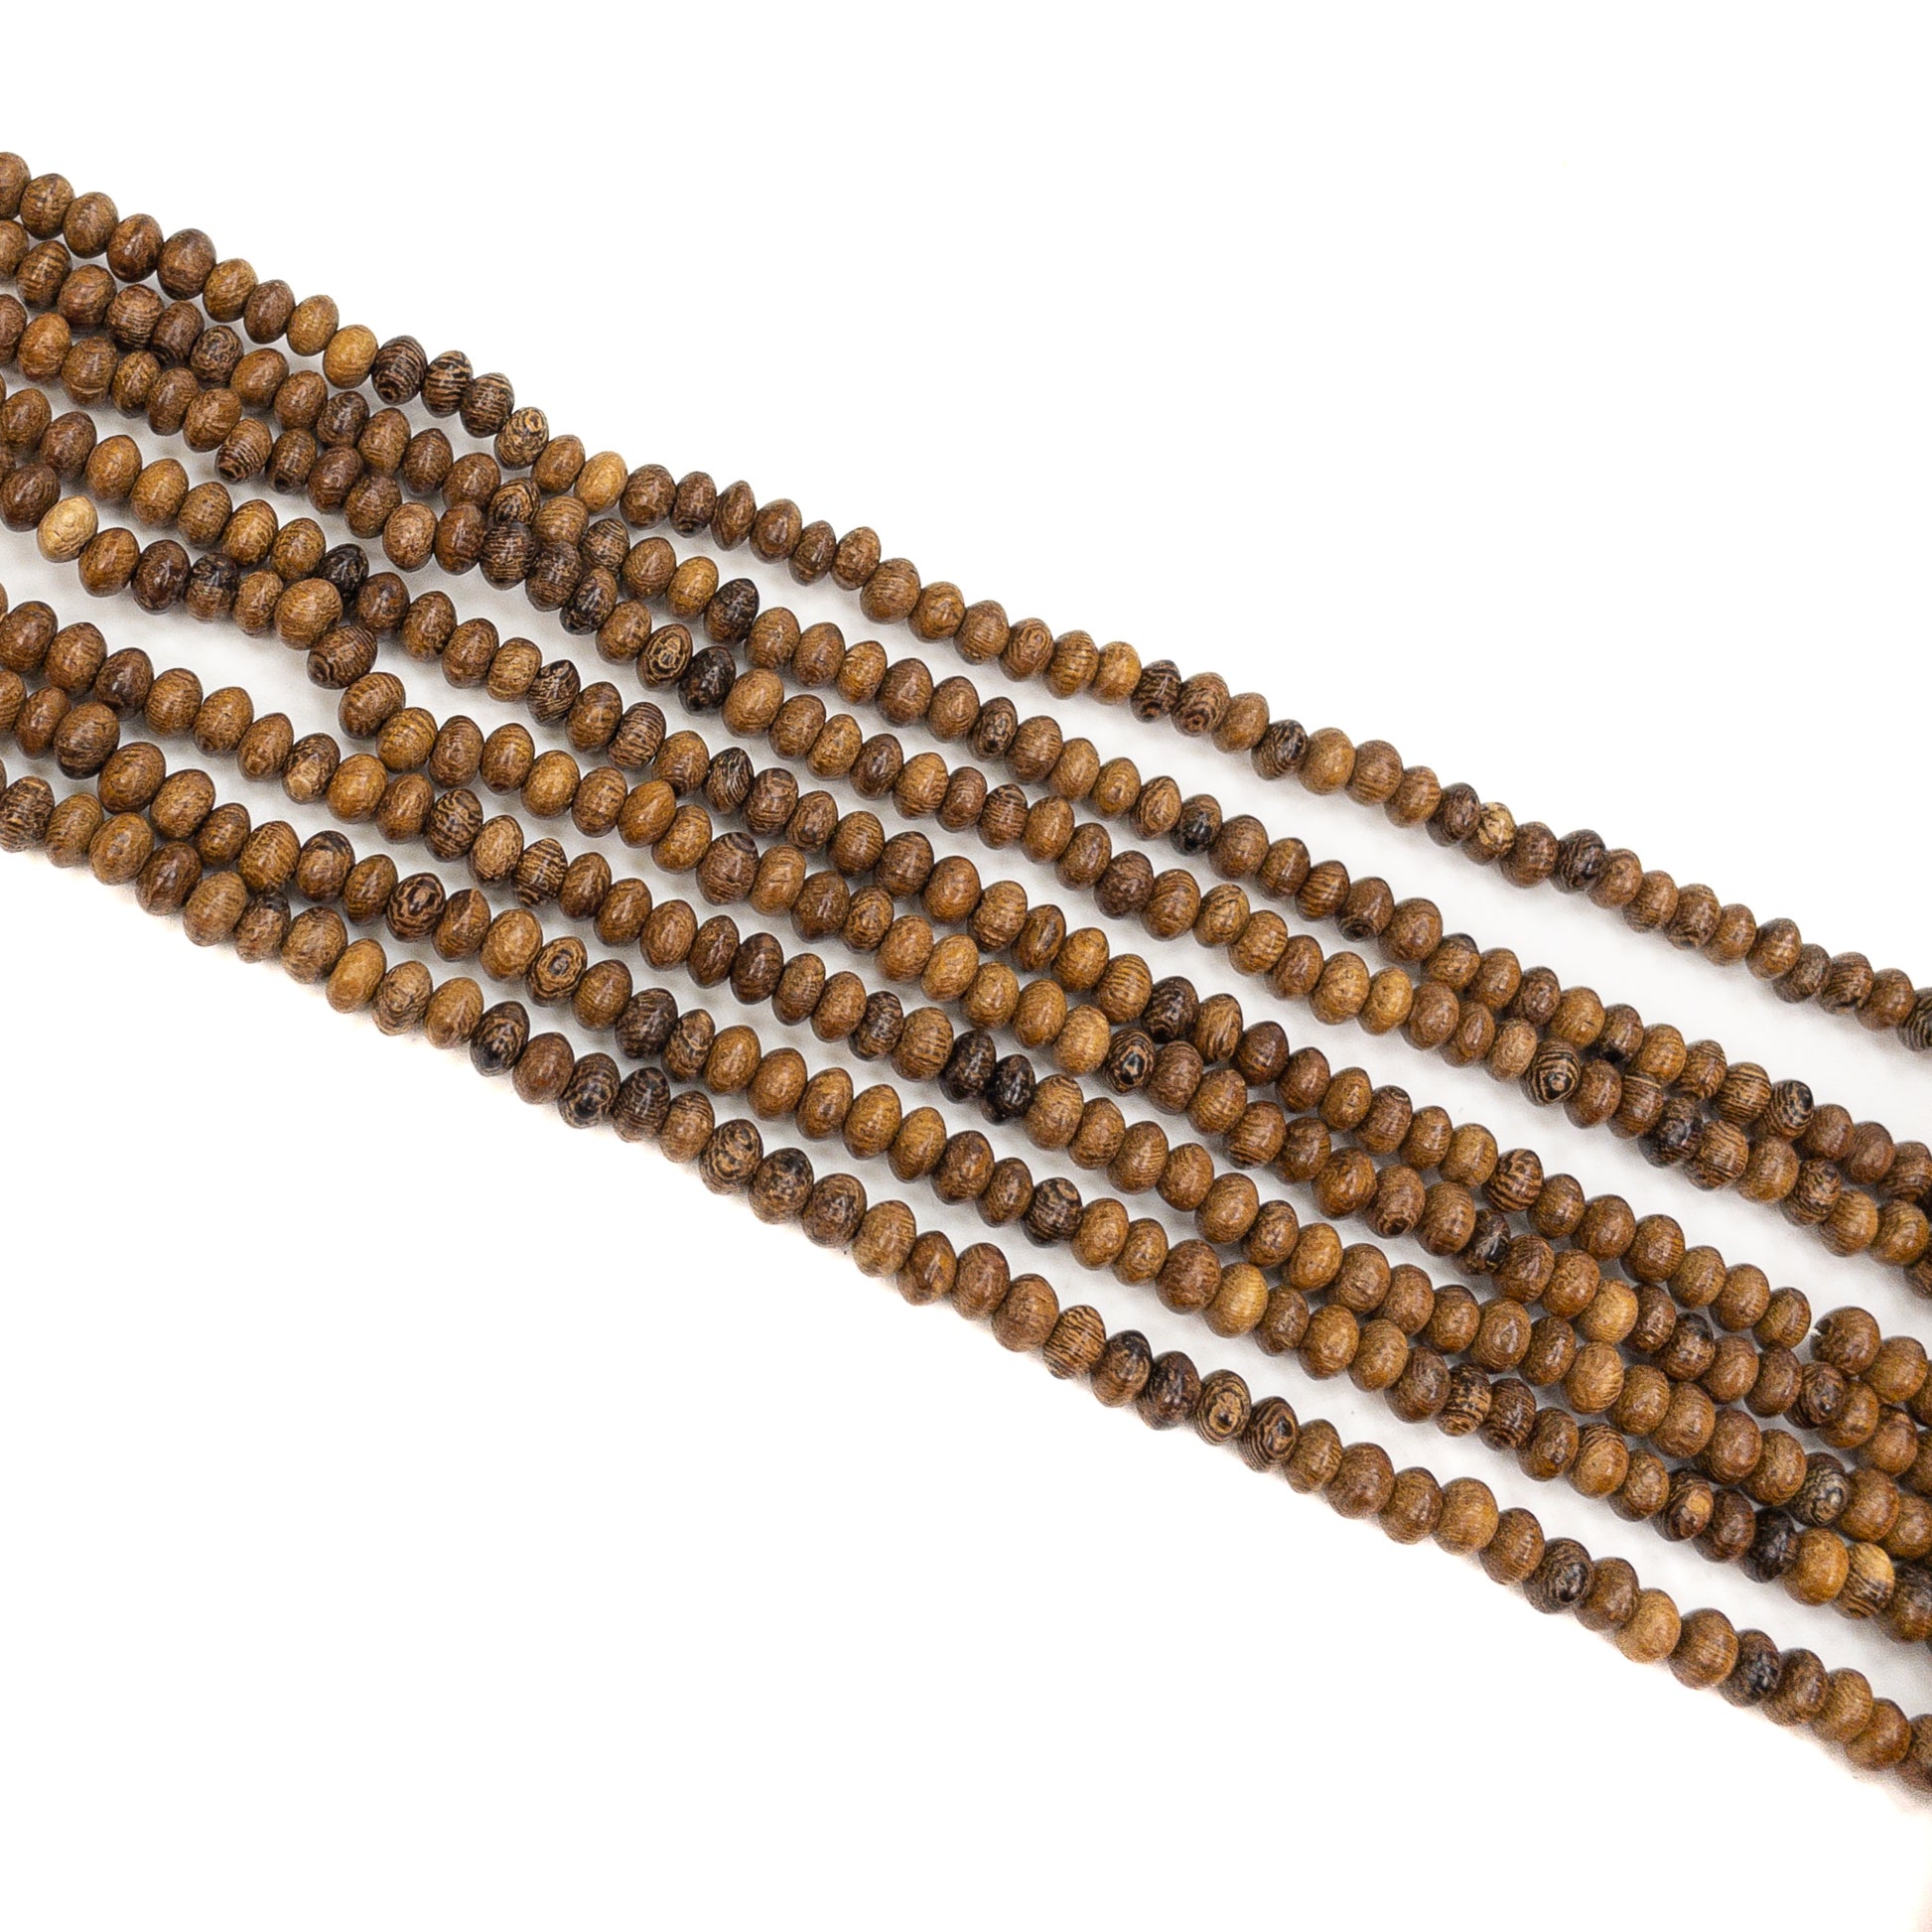 Robles Wood 4x6mm Rondelle Bead - 15.5" Strand